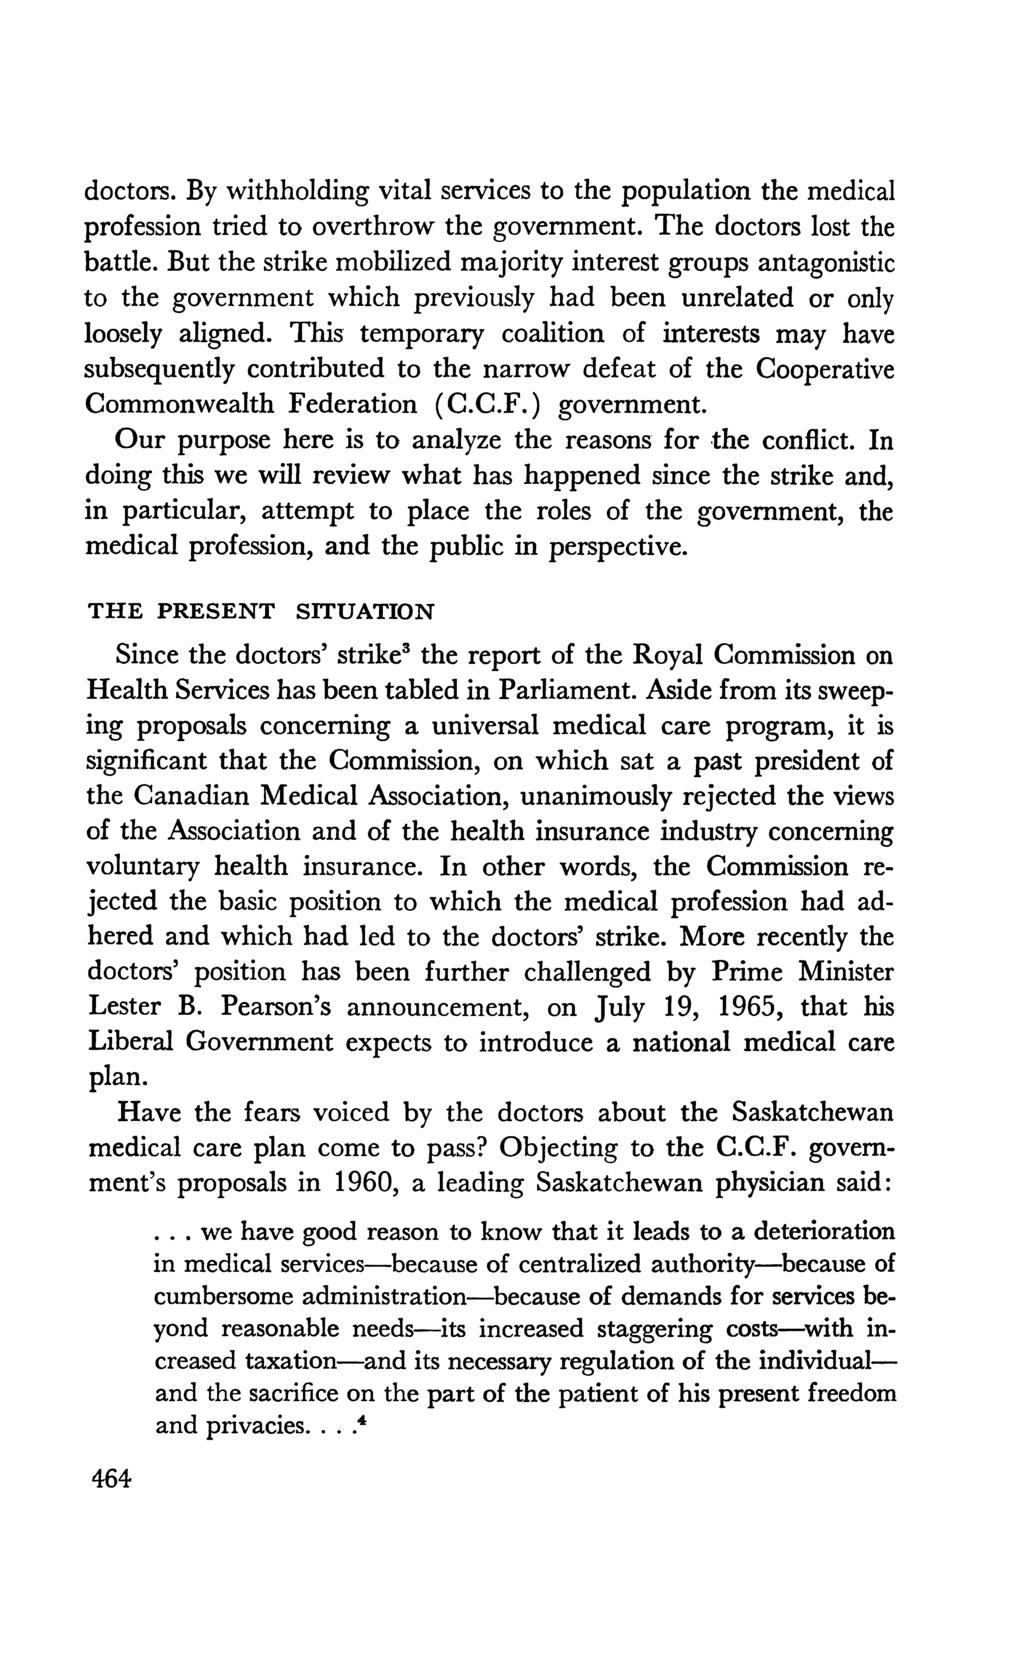 doctors. By withholding vital services to the population the medical profession tried to overthrow the government. The doctors lost the battle.